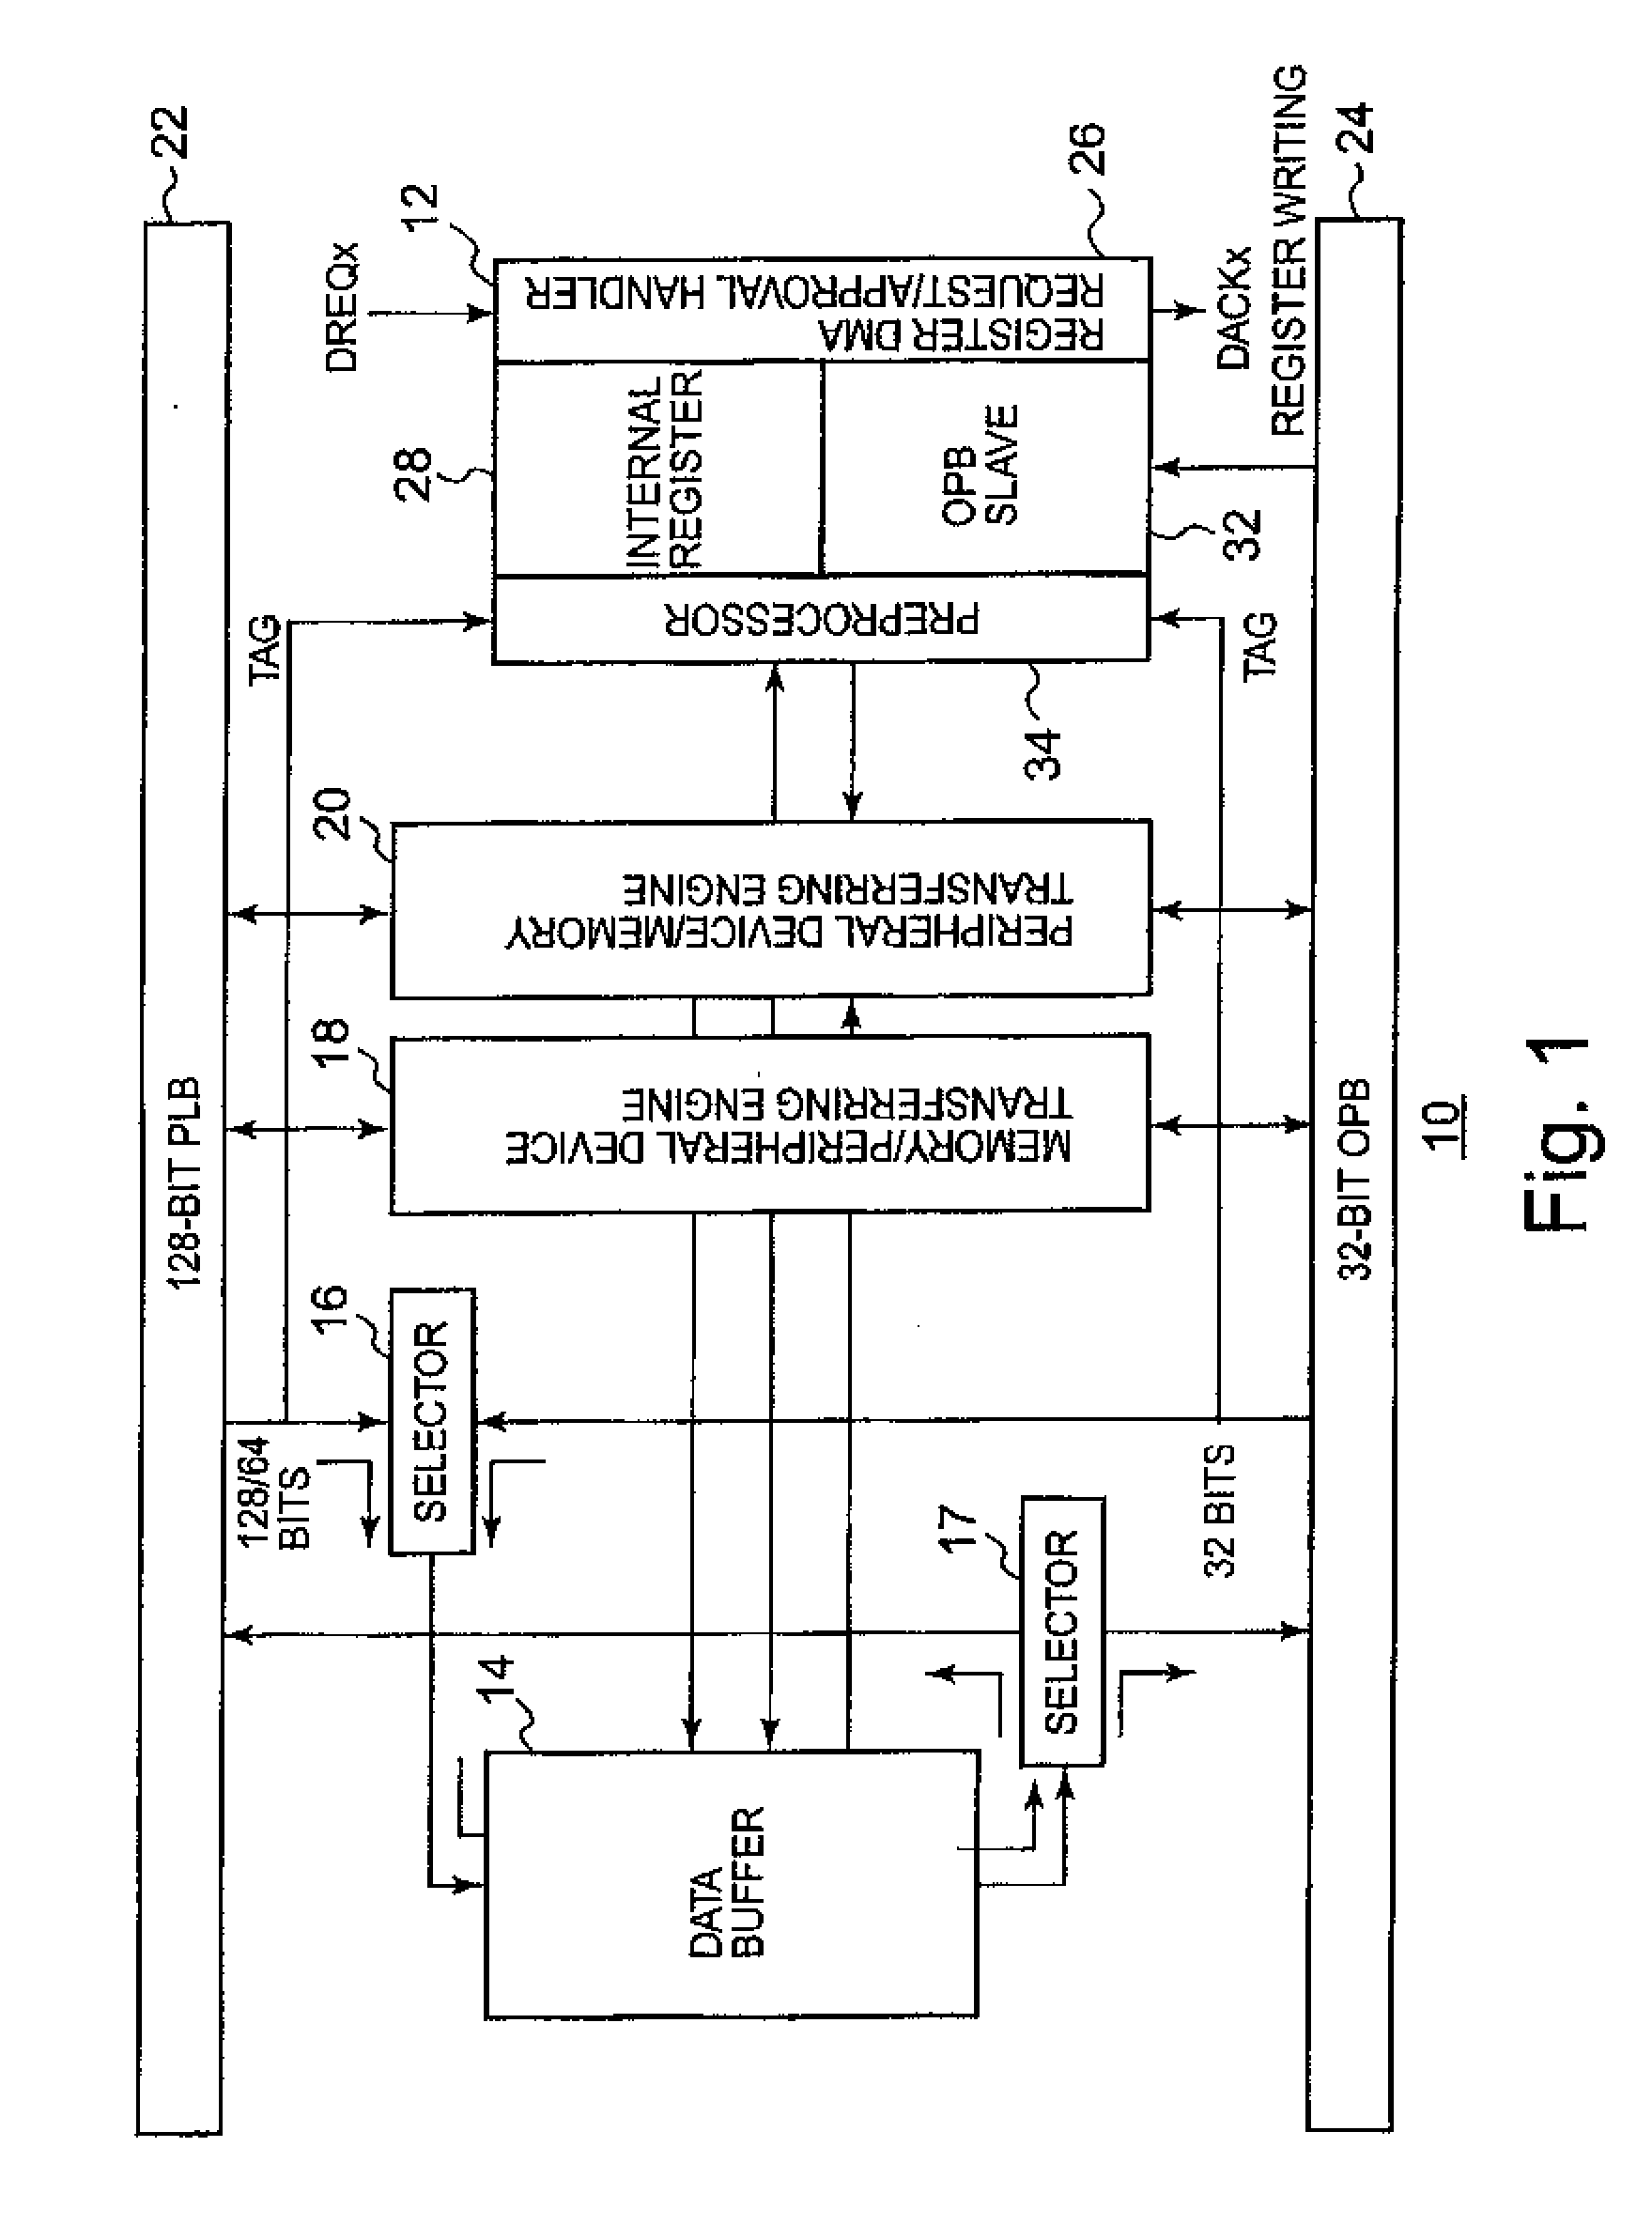 Multi mode DMA controller with transfer packet preprocessor